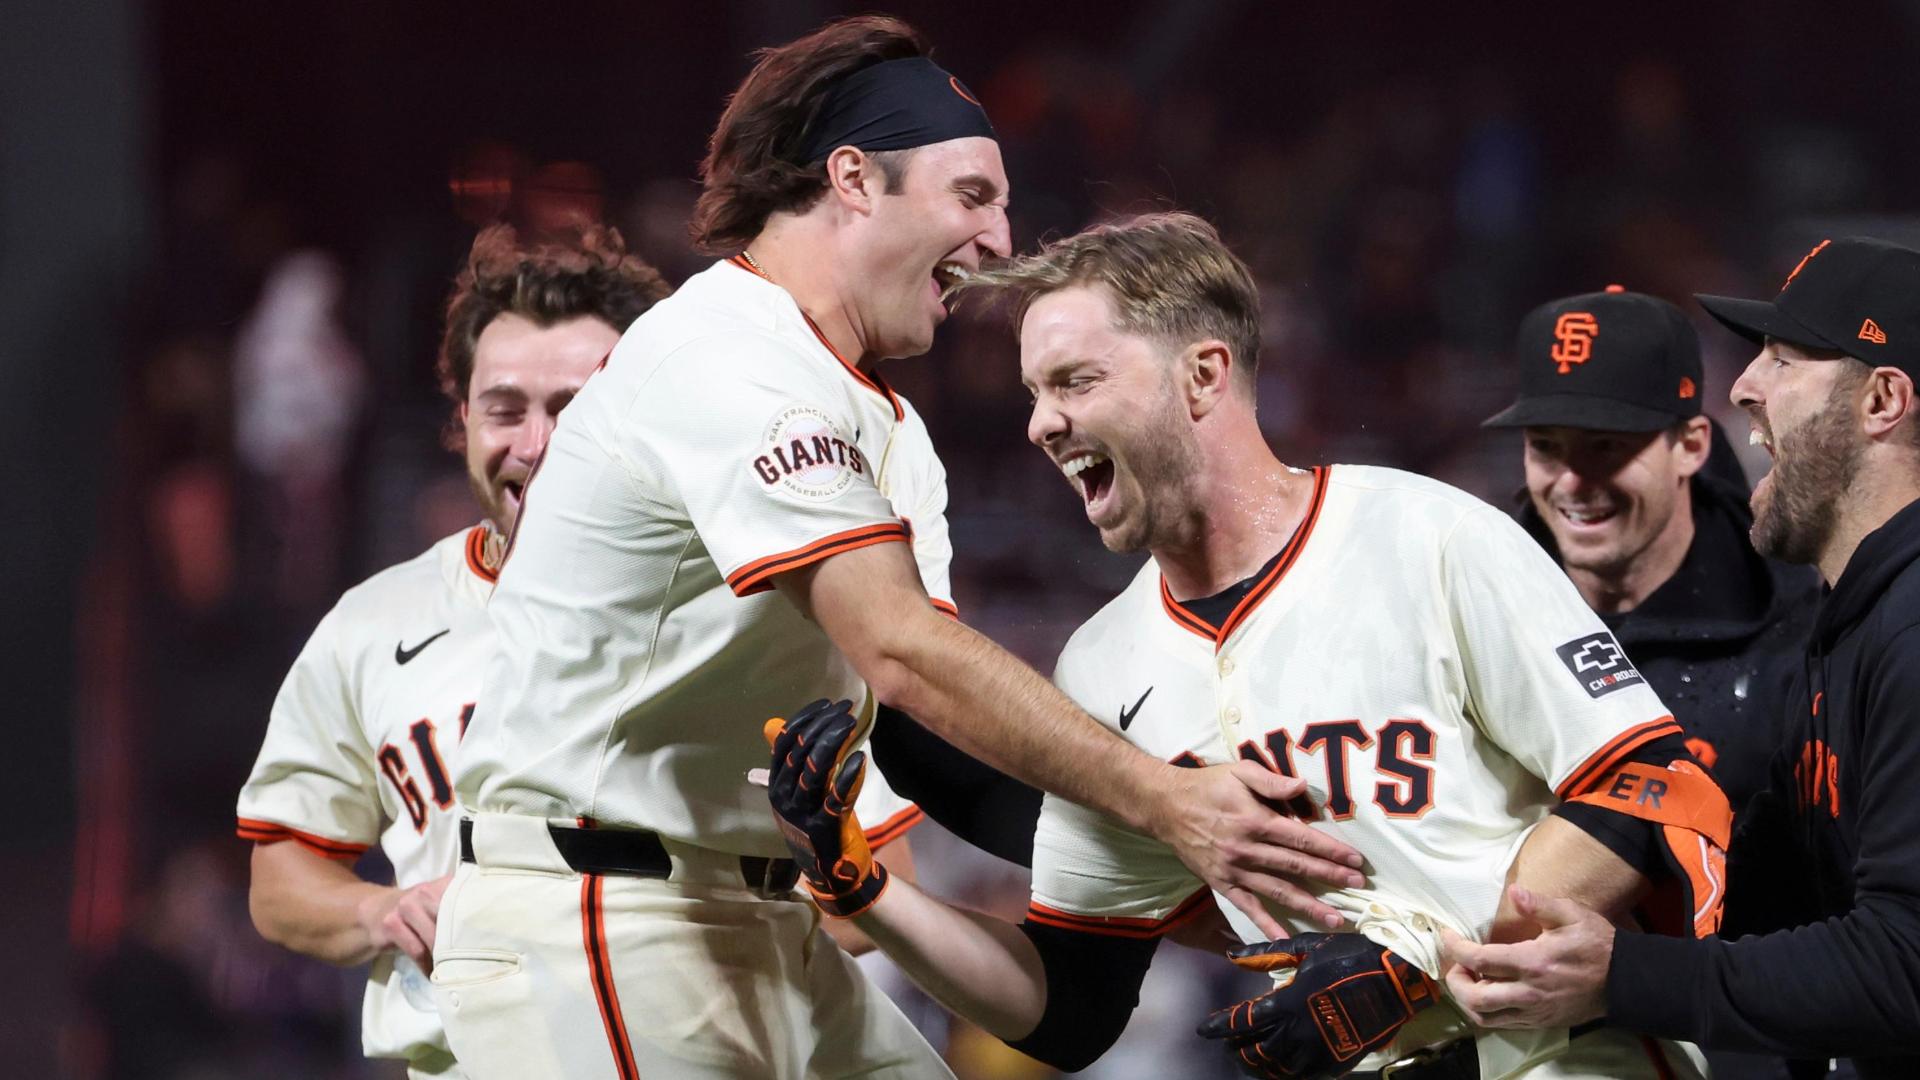 Austin Slater s game-winning single in 10th lifts Giants past Astros 4-3